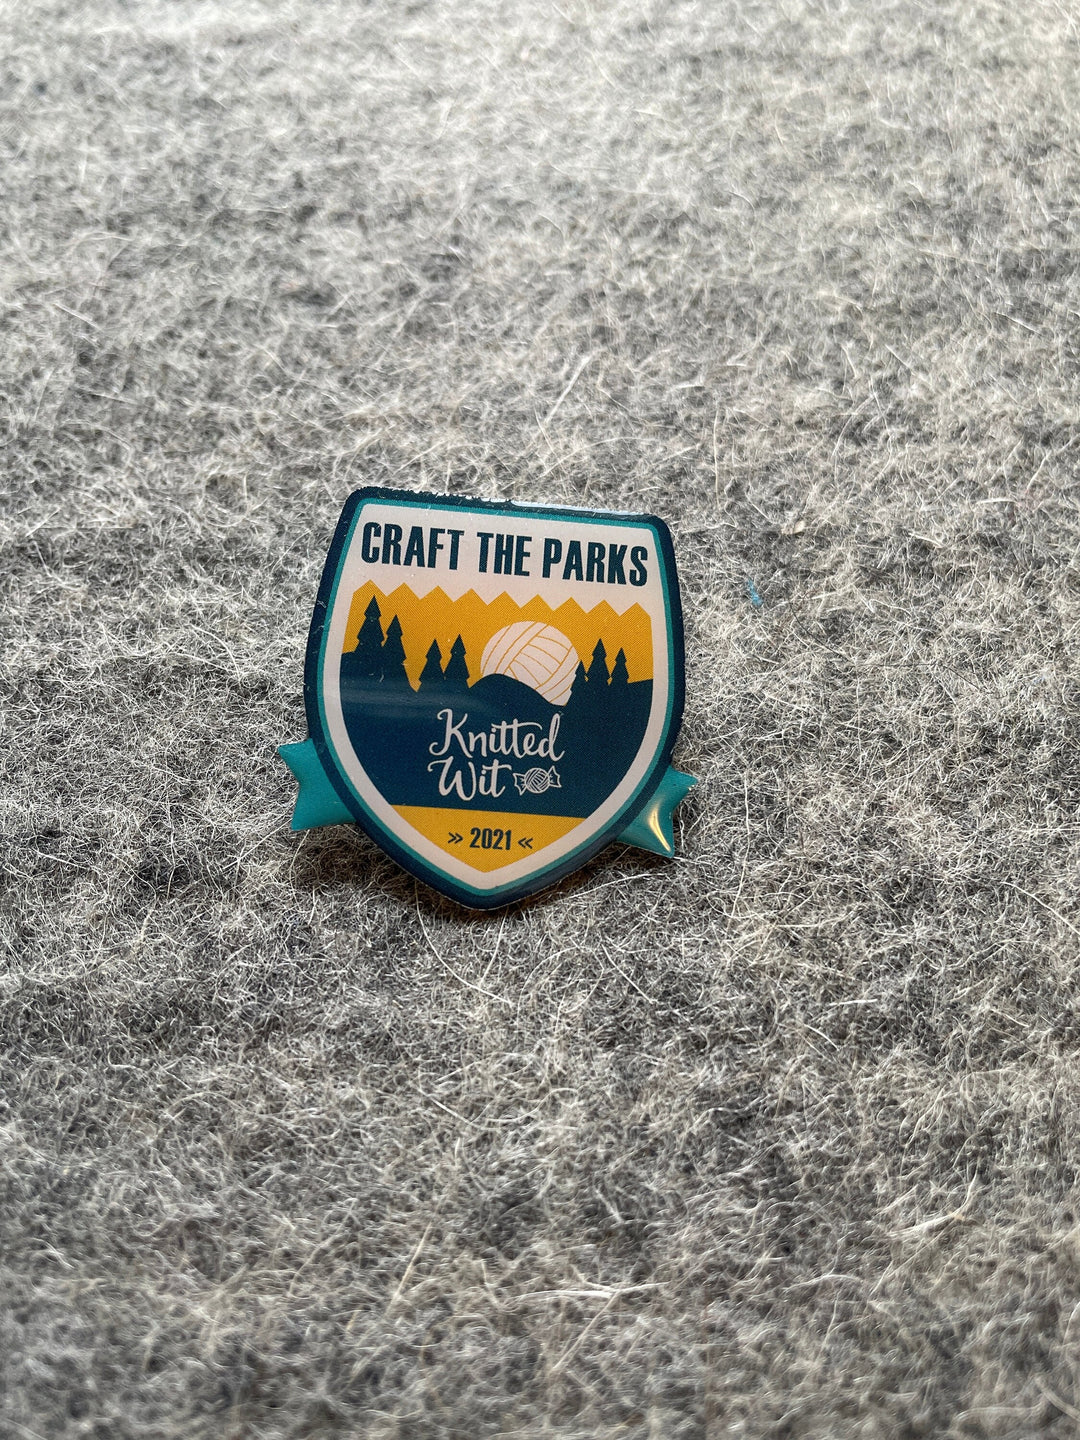 2021 Knitted Wit Craft the Parks Enamel Pin